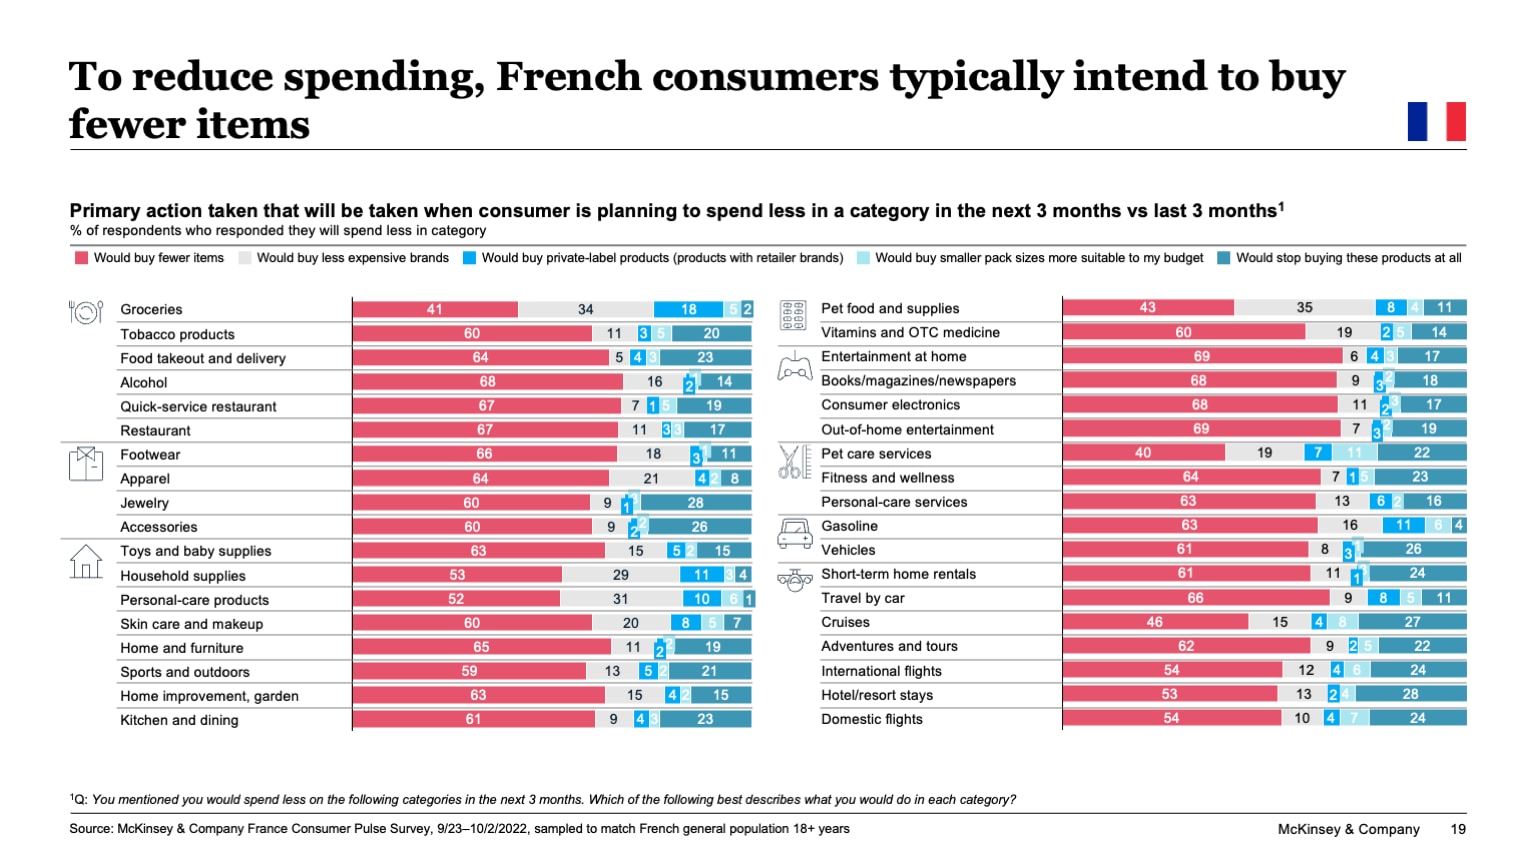 To reduce spending, French consumers typically intend to buy fewer items